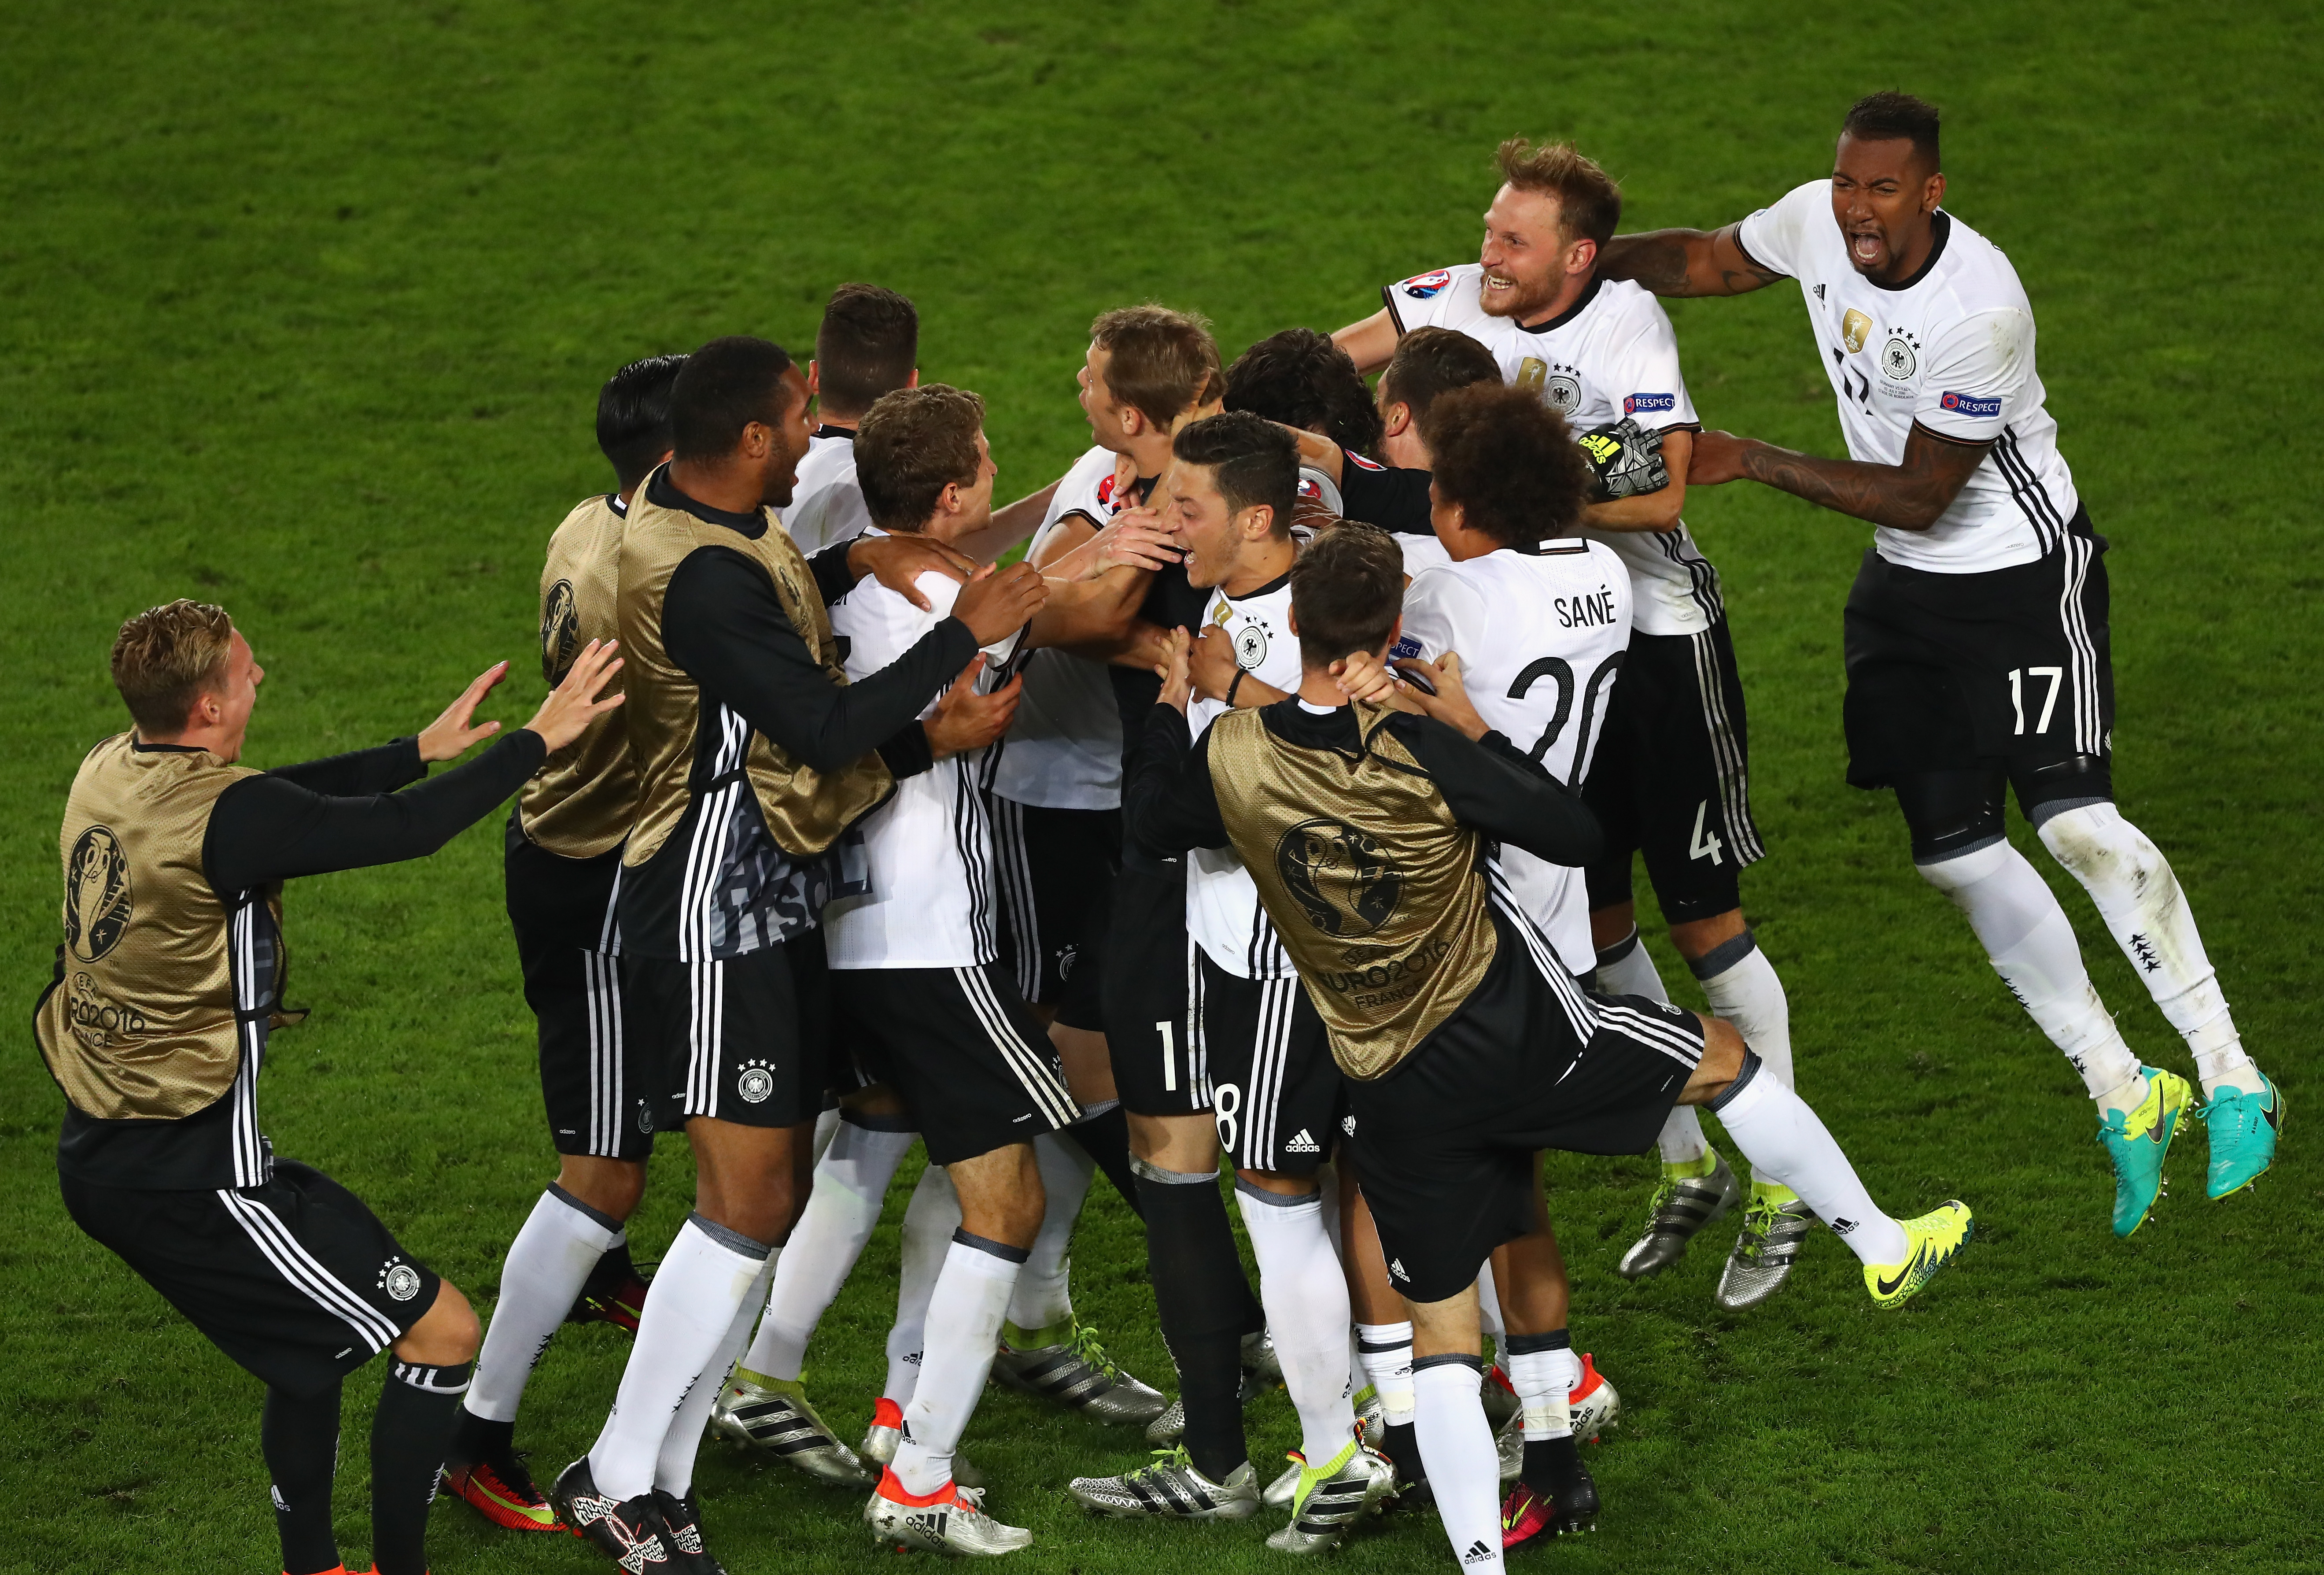 BORDEAUX, FRANCE - JULY 02:  Germany  players celebrate their win through the penalty shootout during the UEFA EURO 2016 quarter final match between Germany and Italy at Stade Matmut Atlantique on July 2, 2016 in Bordeaux, France.  (Photo by Lars Baron/Getty Images)